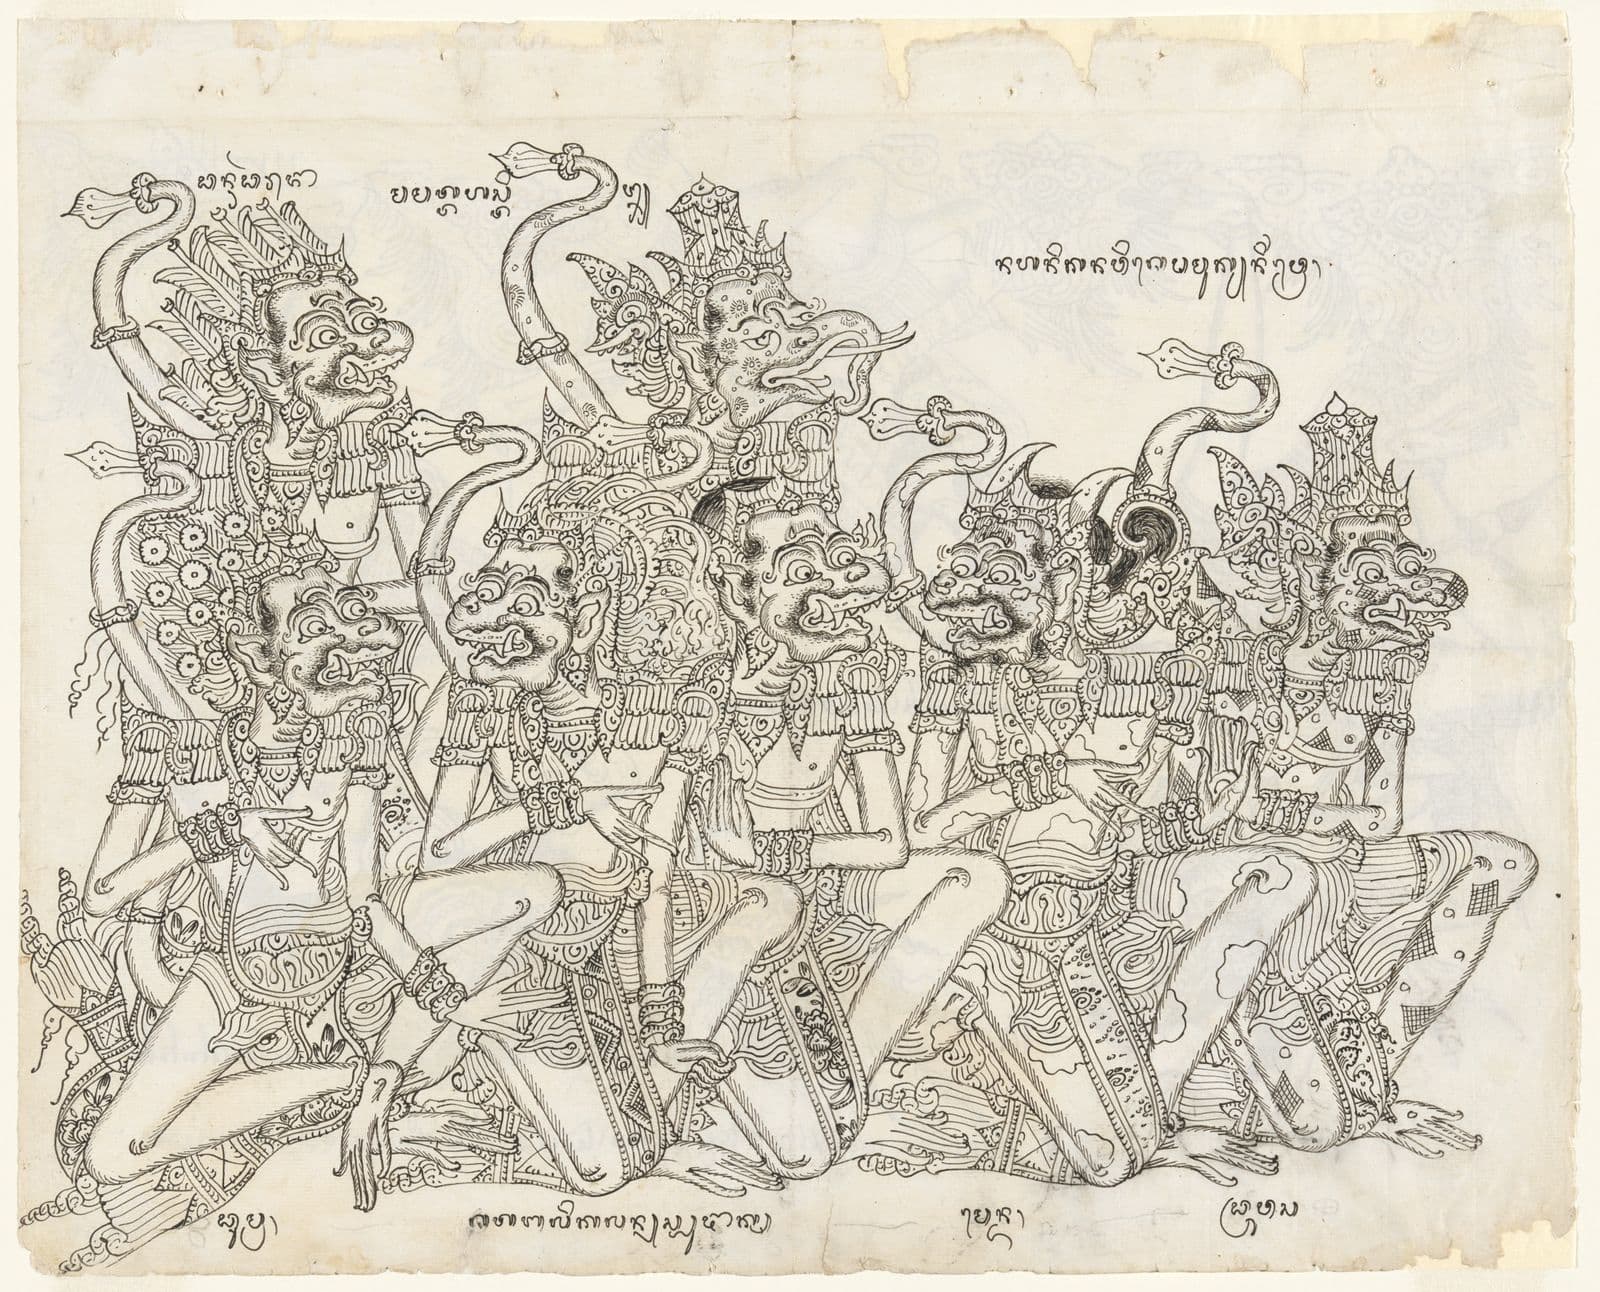 Traditional image of seven mythical creatures from the Ramayana